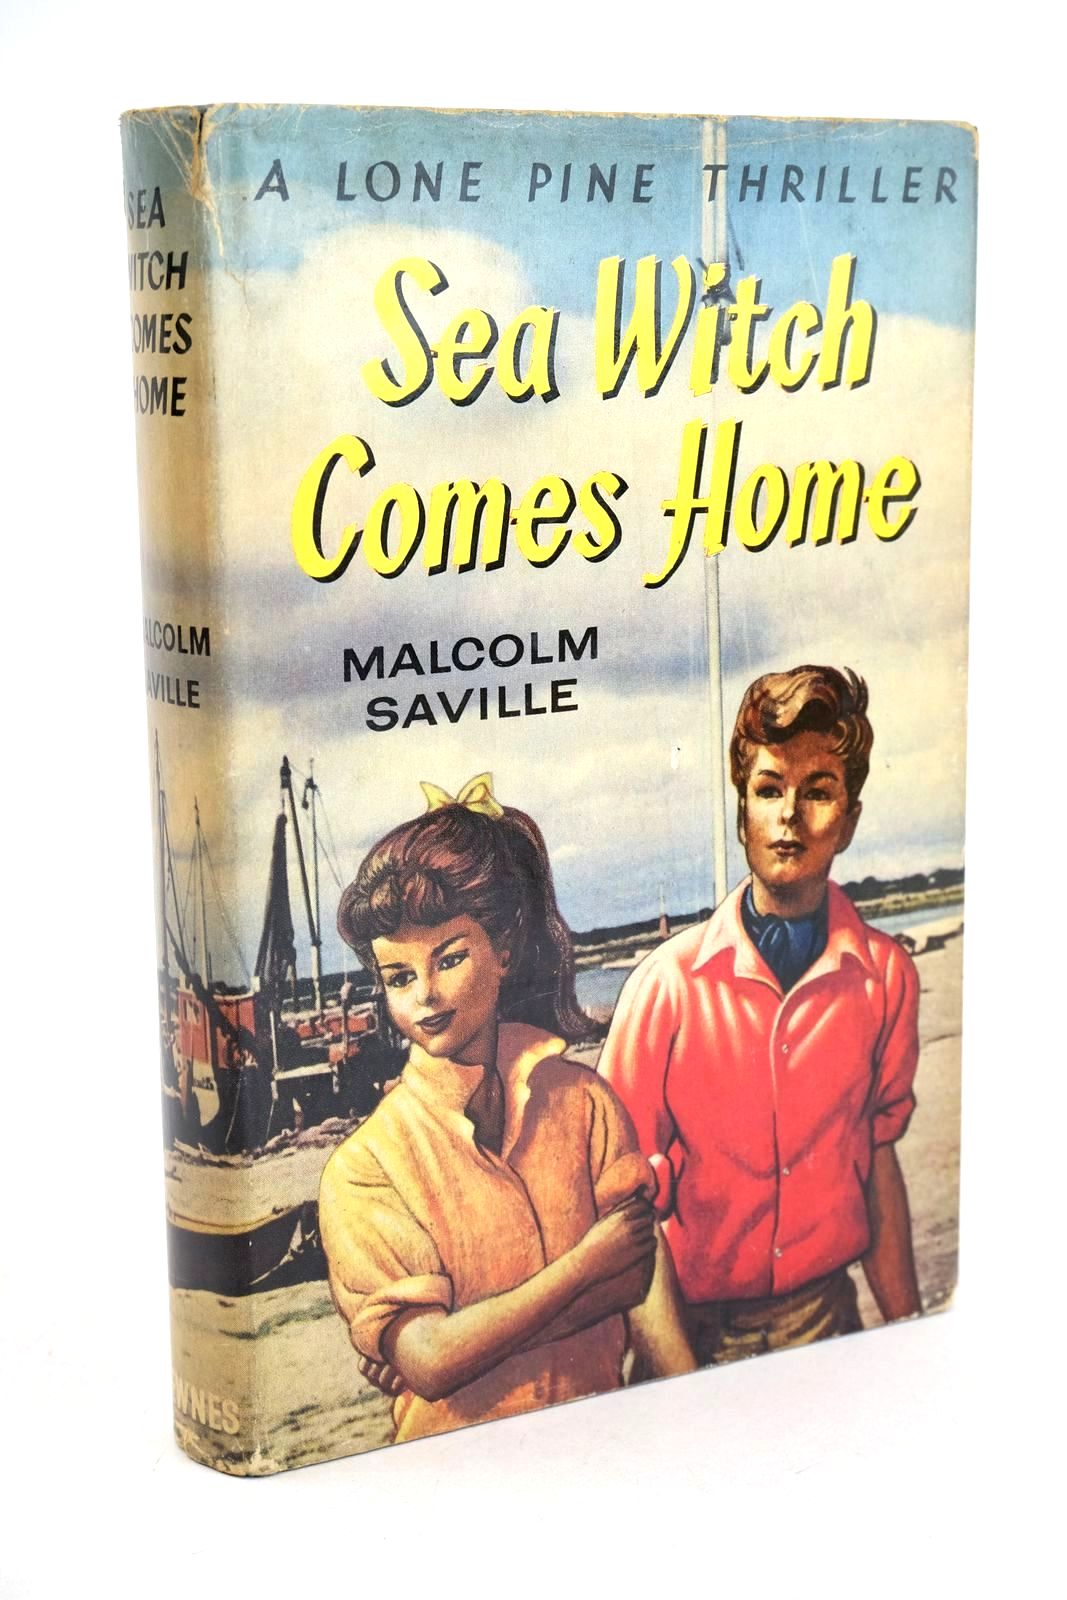 Photo of SEA WITCH COMES HOME written by Saville, Malcolm published by George Newnes Ltd. (STOCK CODE: 1327079)  for sale by Stella & Rose's Books